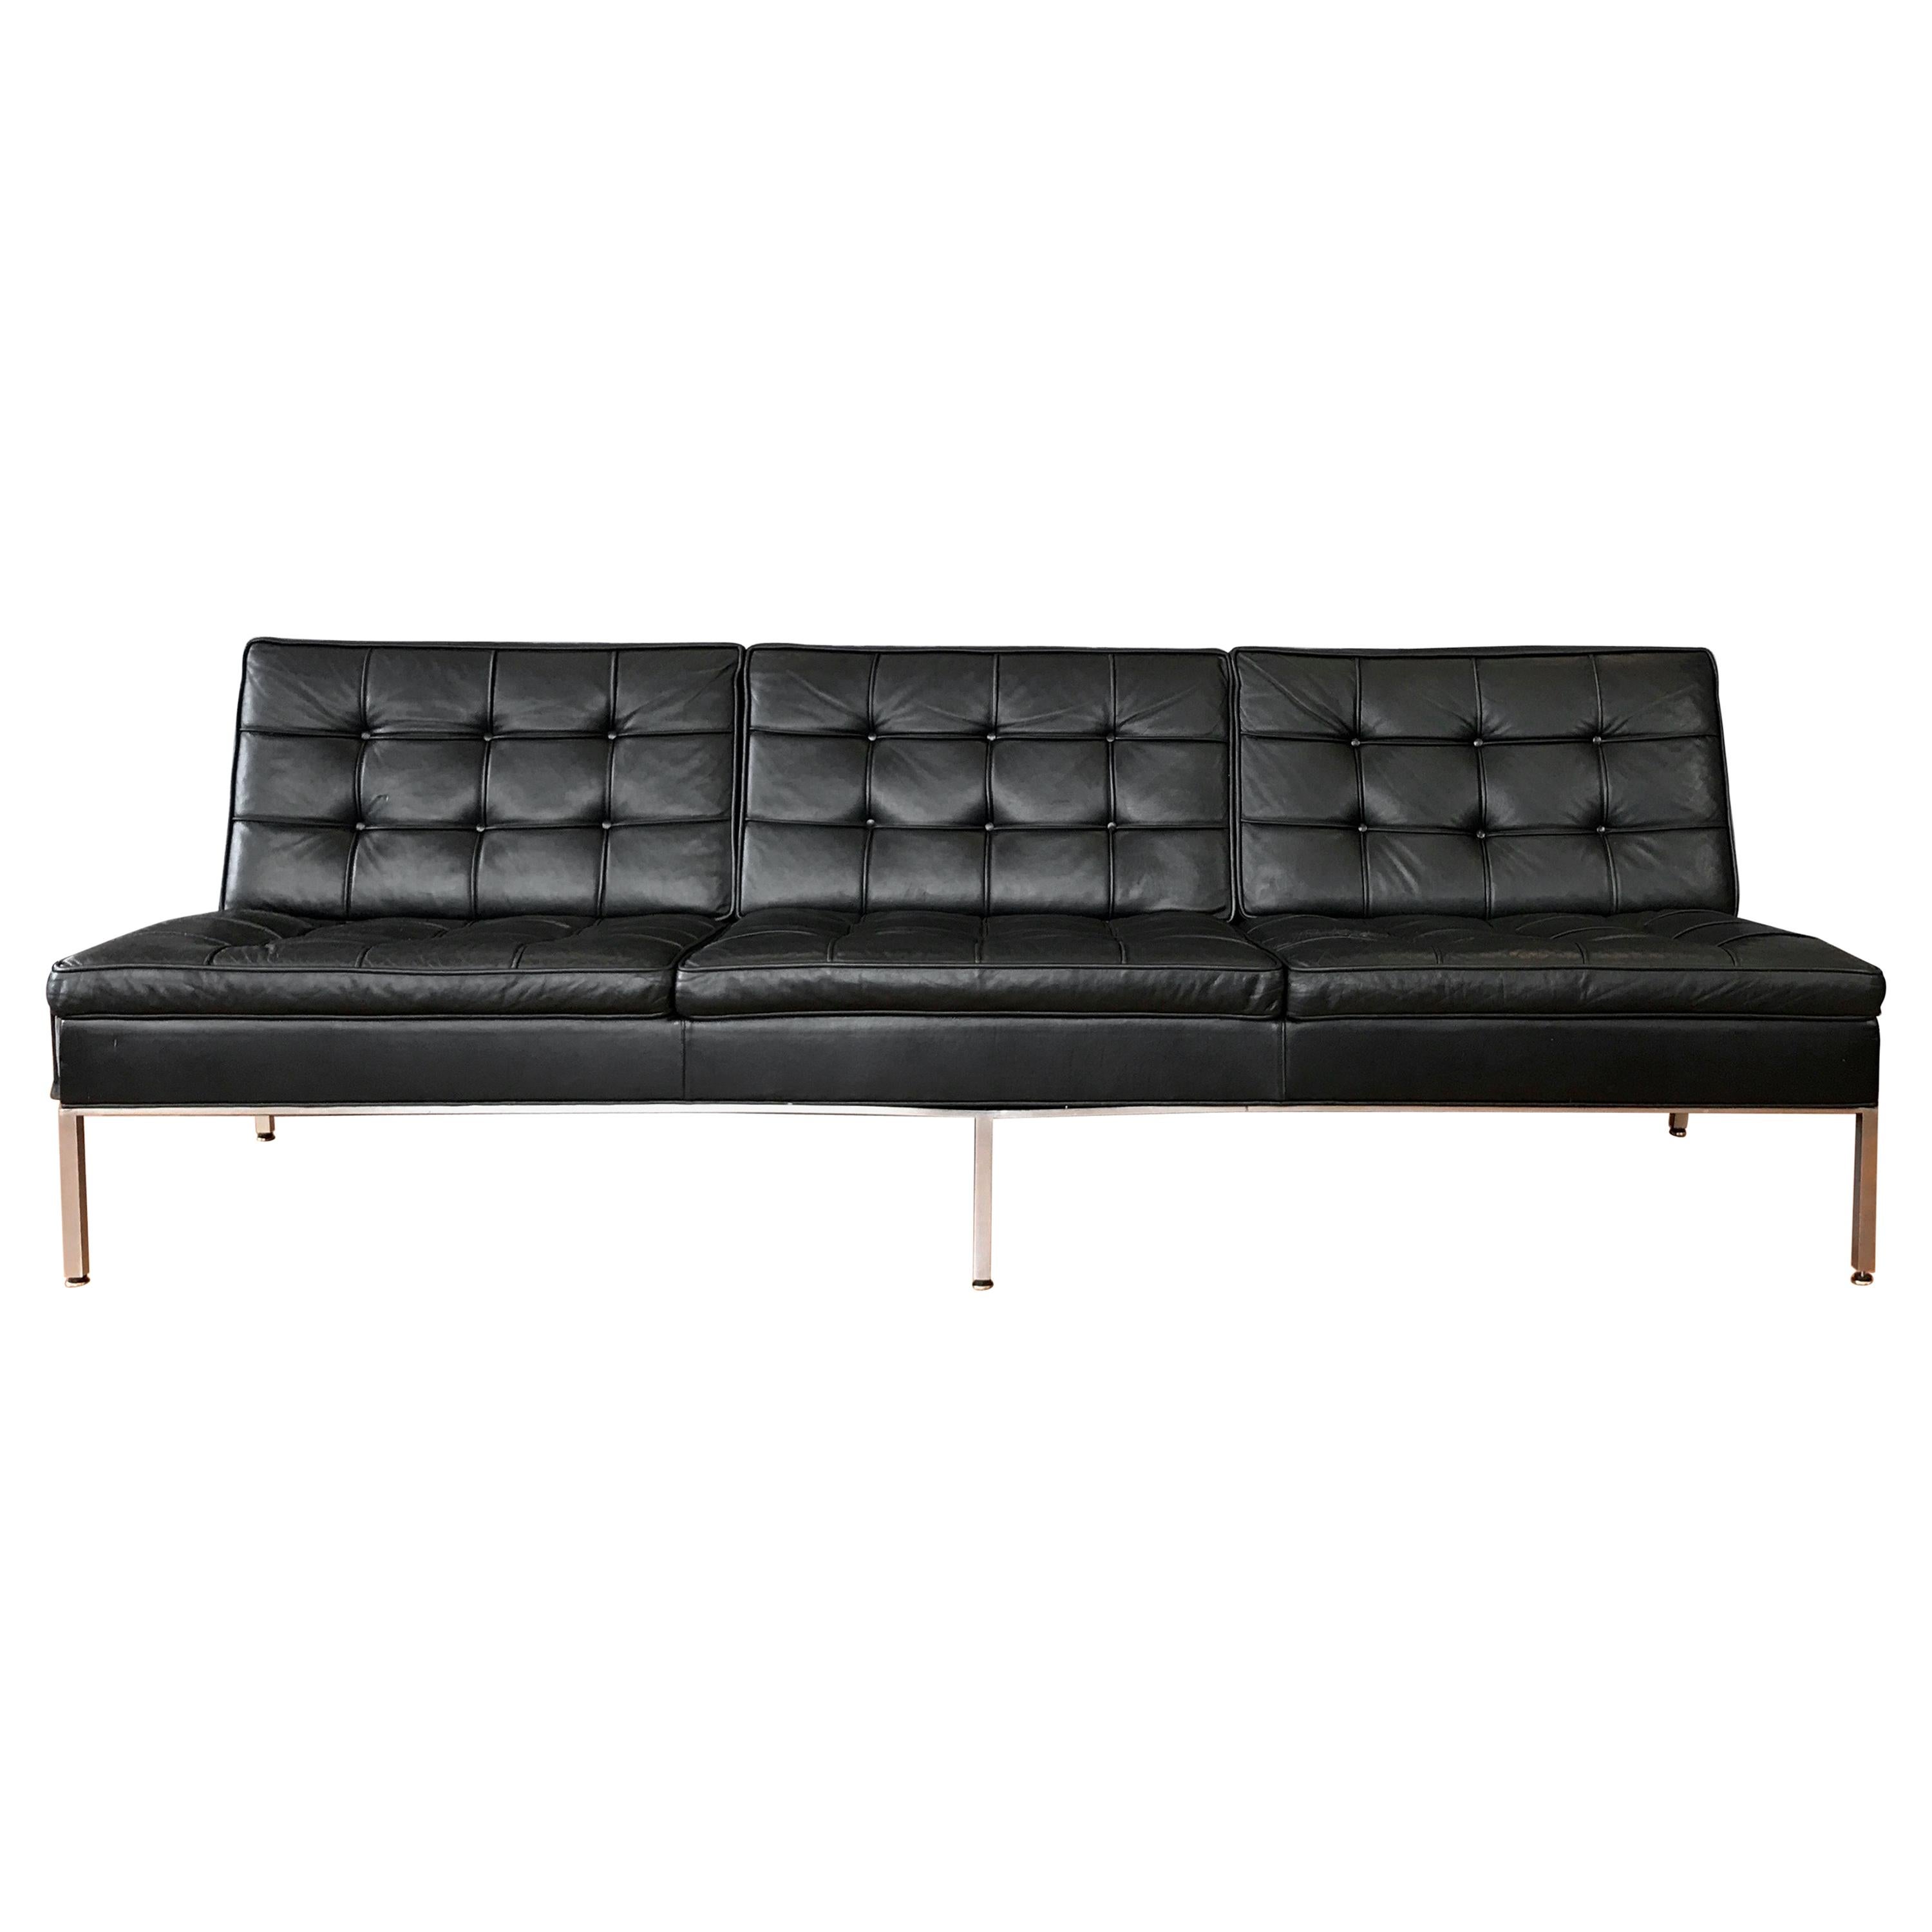 Steelcase Florence Knoll-Style Extra-Long Tufted Black Leather Sofa, 1960s